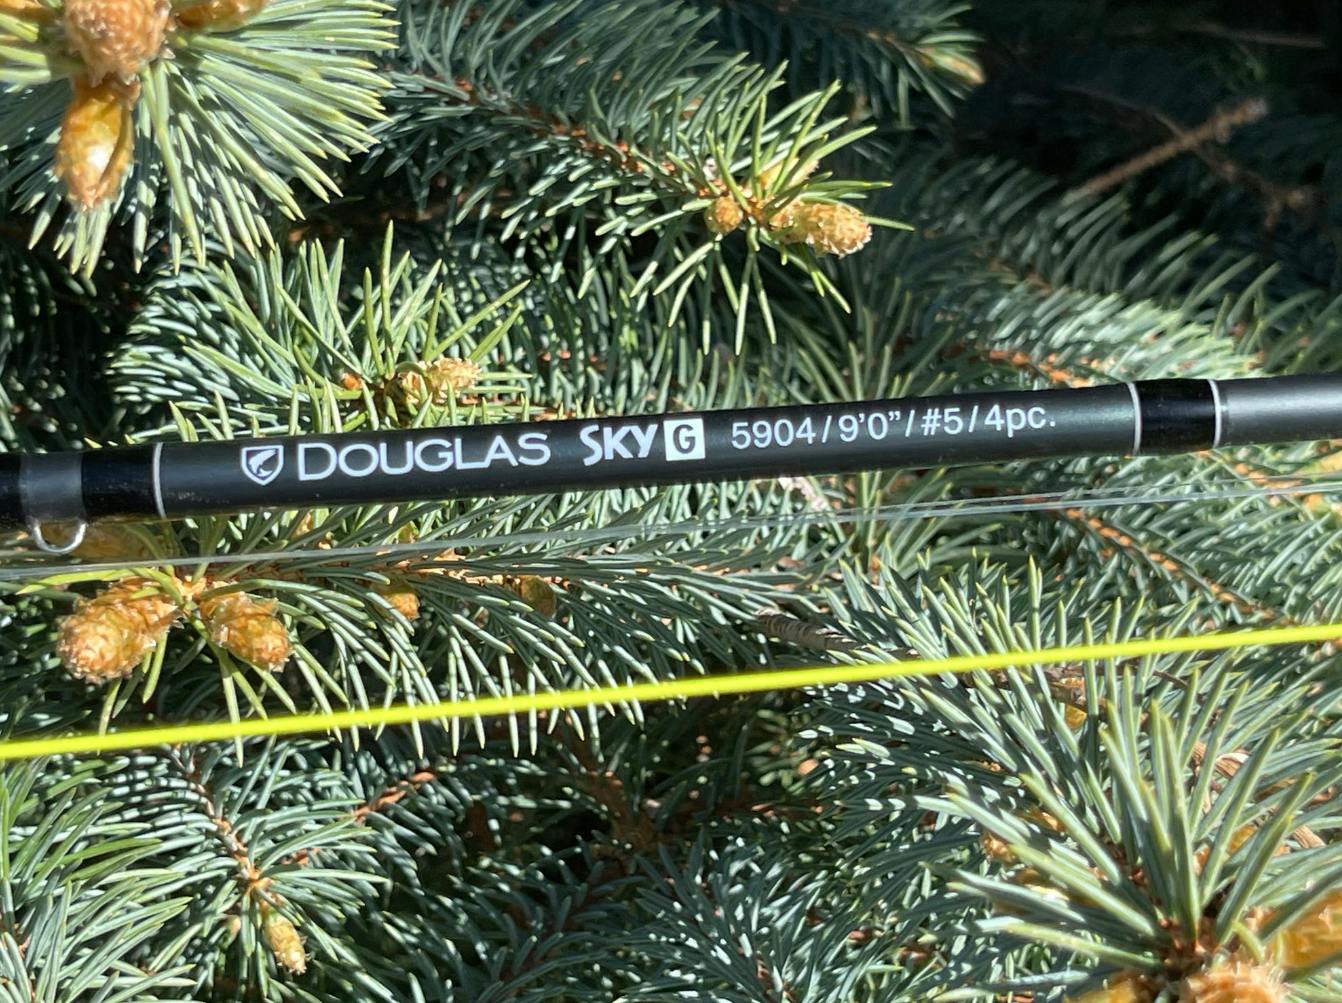 Close up of one part of the Douglas SKY G Fly Rod.